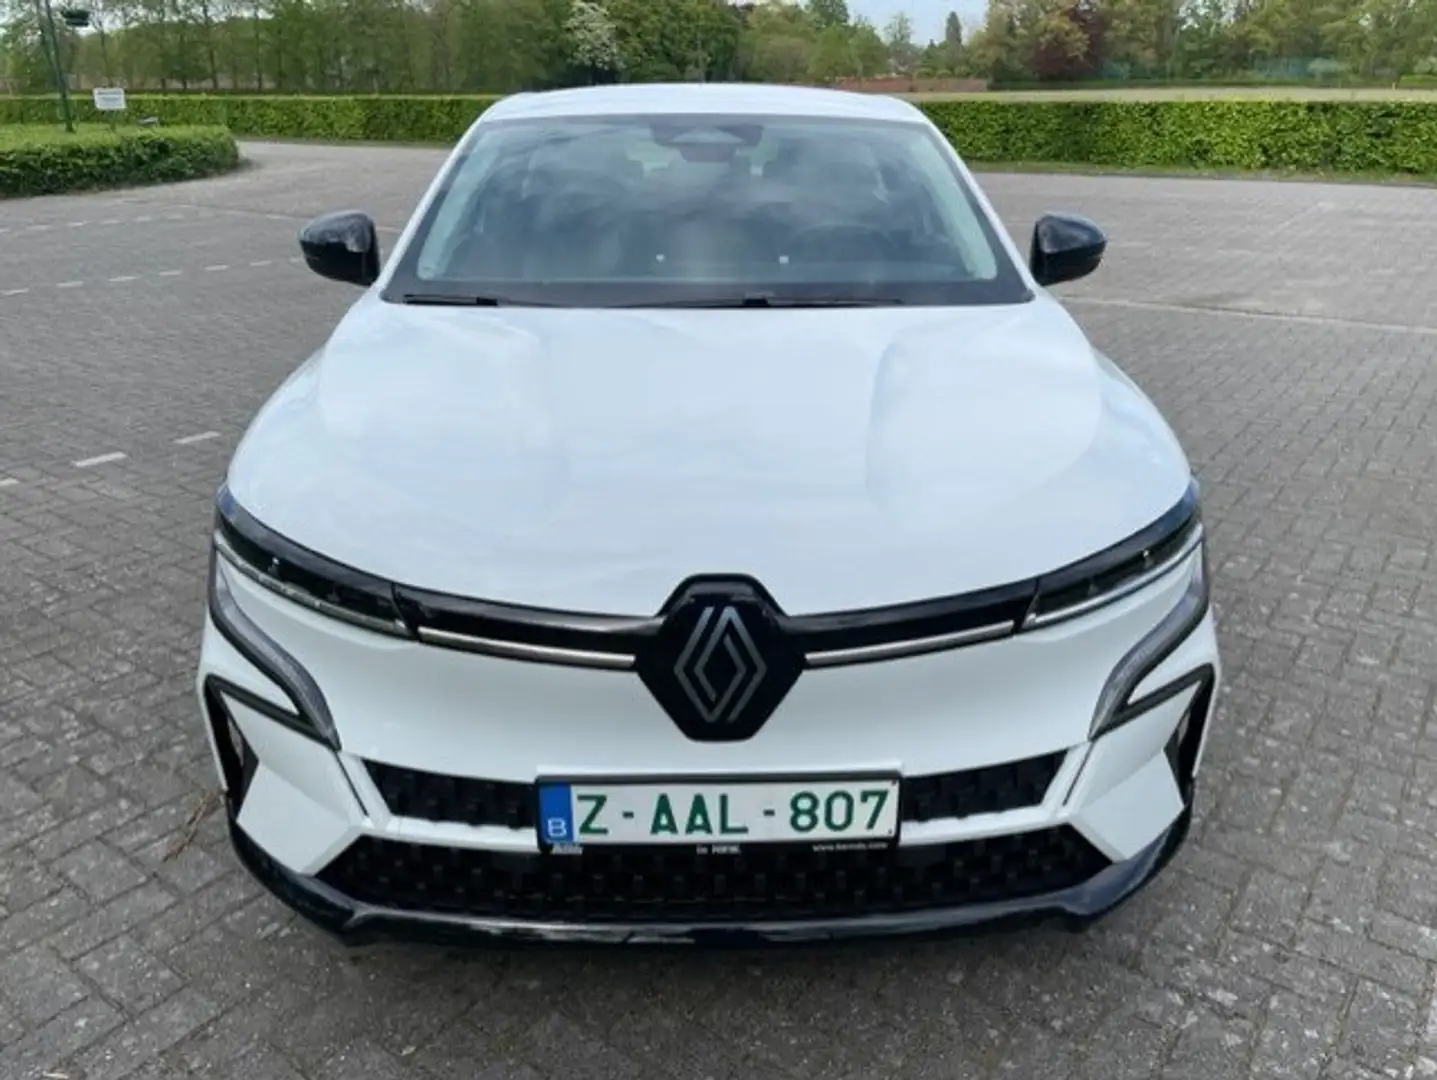 Renault Megane E-Tech 40 kWh Equilibre R130 Standard charge DEMOWAGEN White - 2